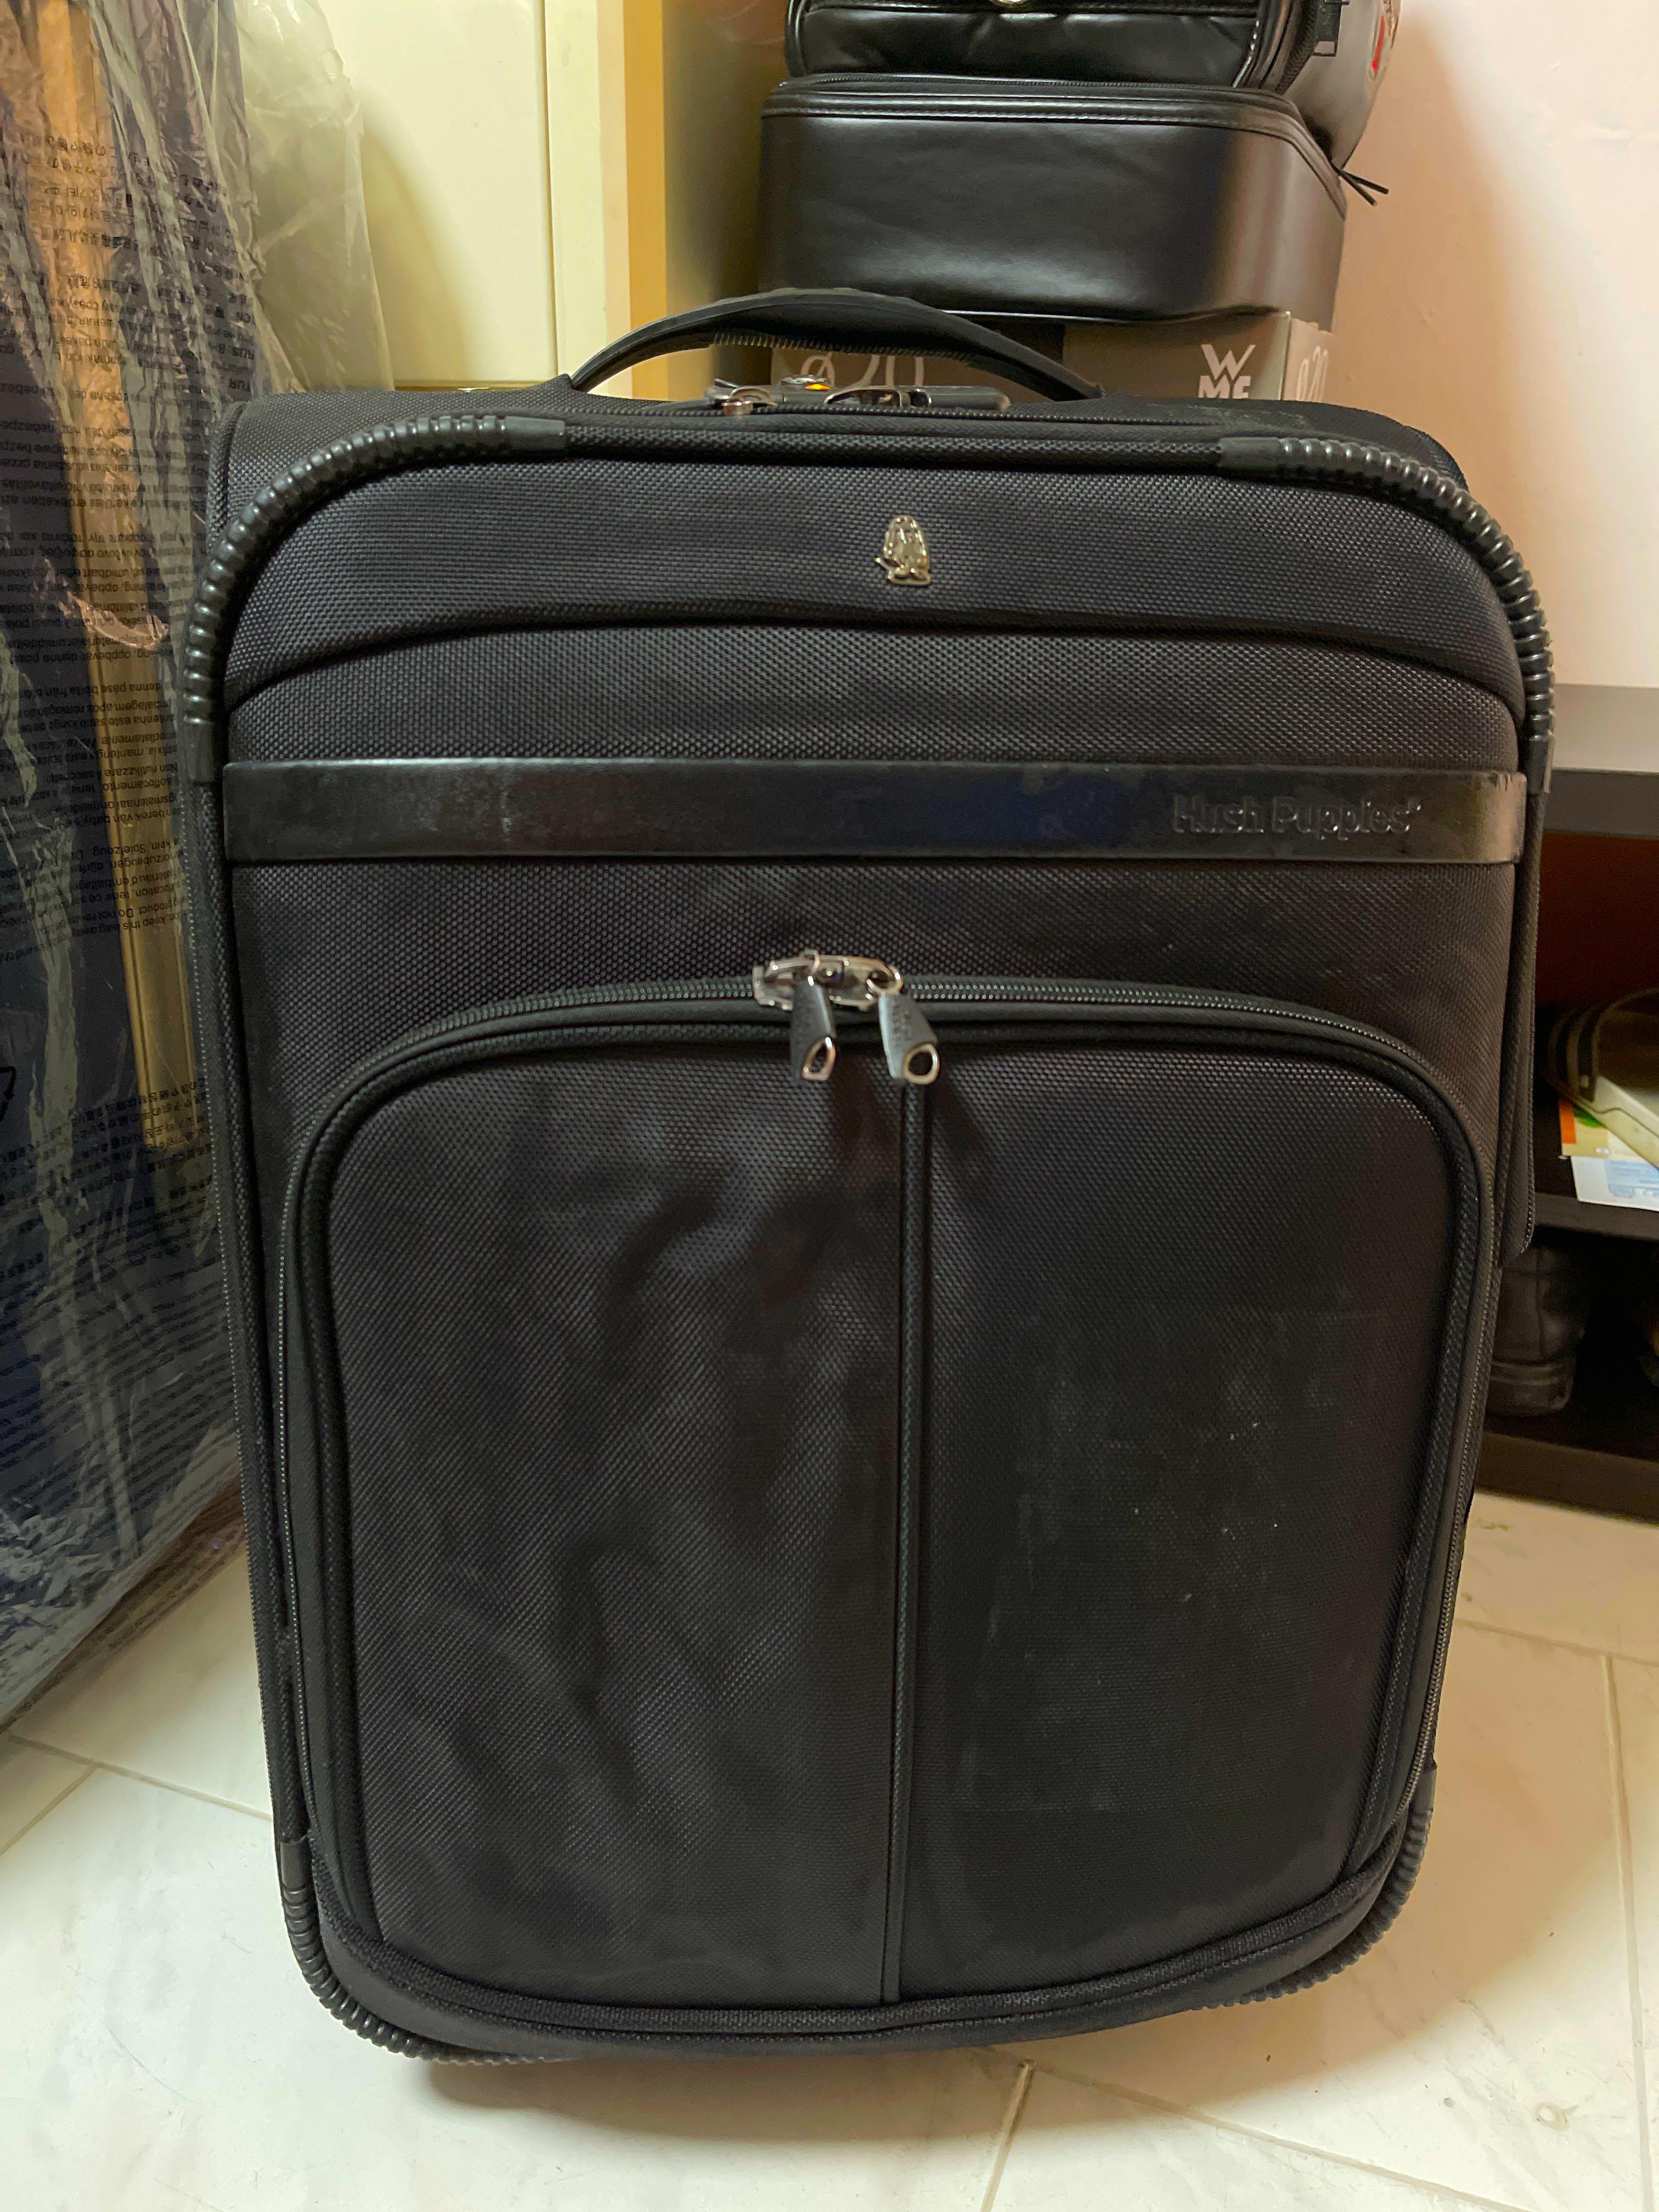 Authentic hush puppies cabin size luggage, Hobbies & Toys, Travel ...